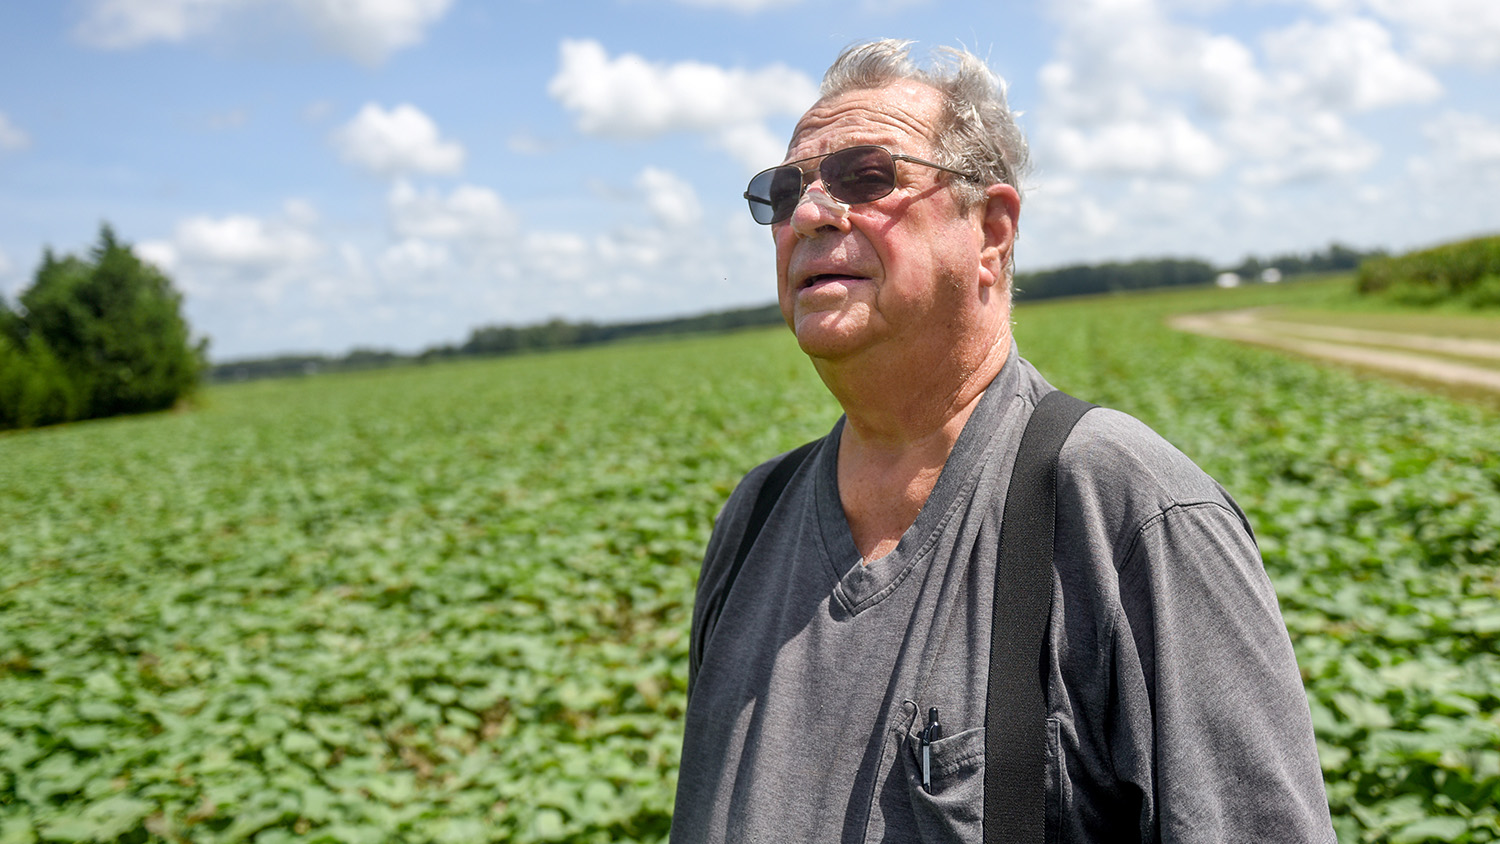 Kendall Hill is the co-owner of Tull Hill Farms in Kinston and the chair of the North Carolina Sweet Potato Commission's Campaign for Excellence.